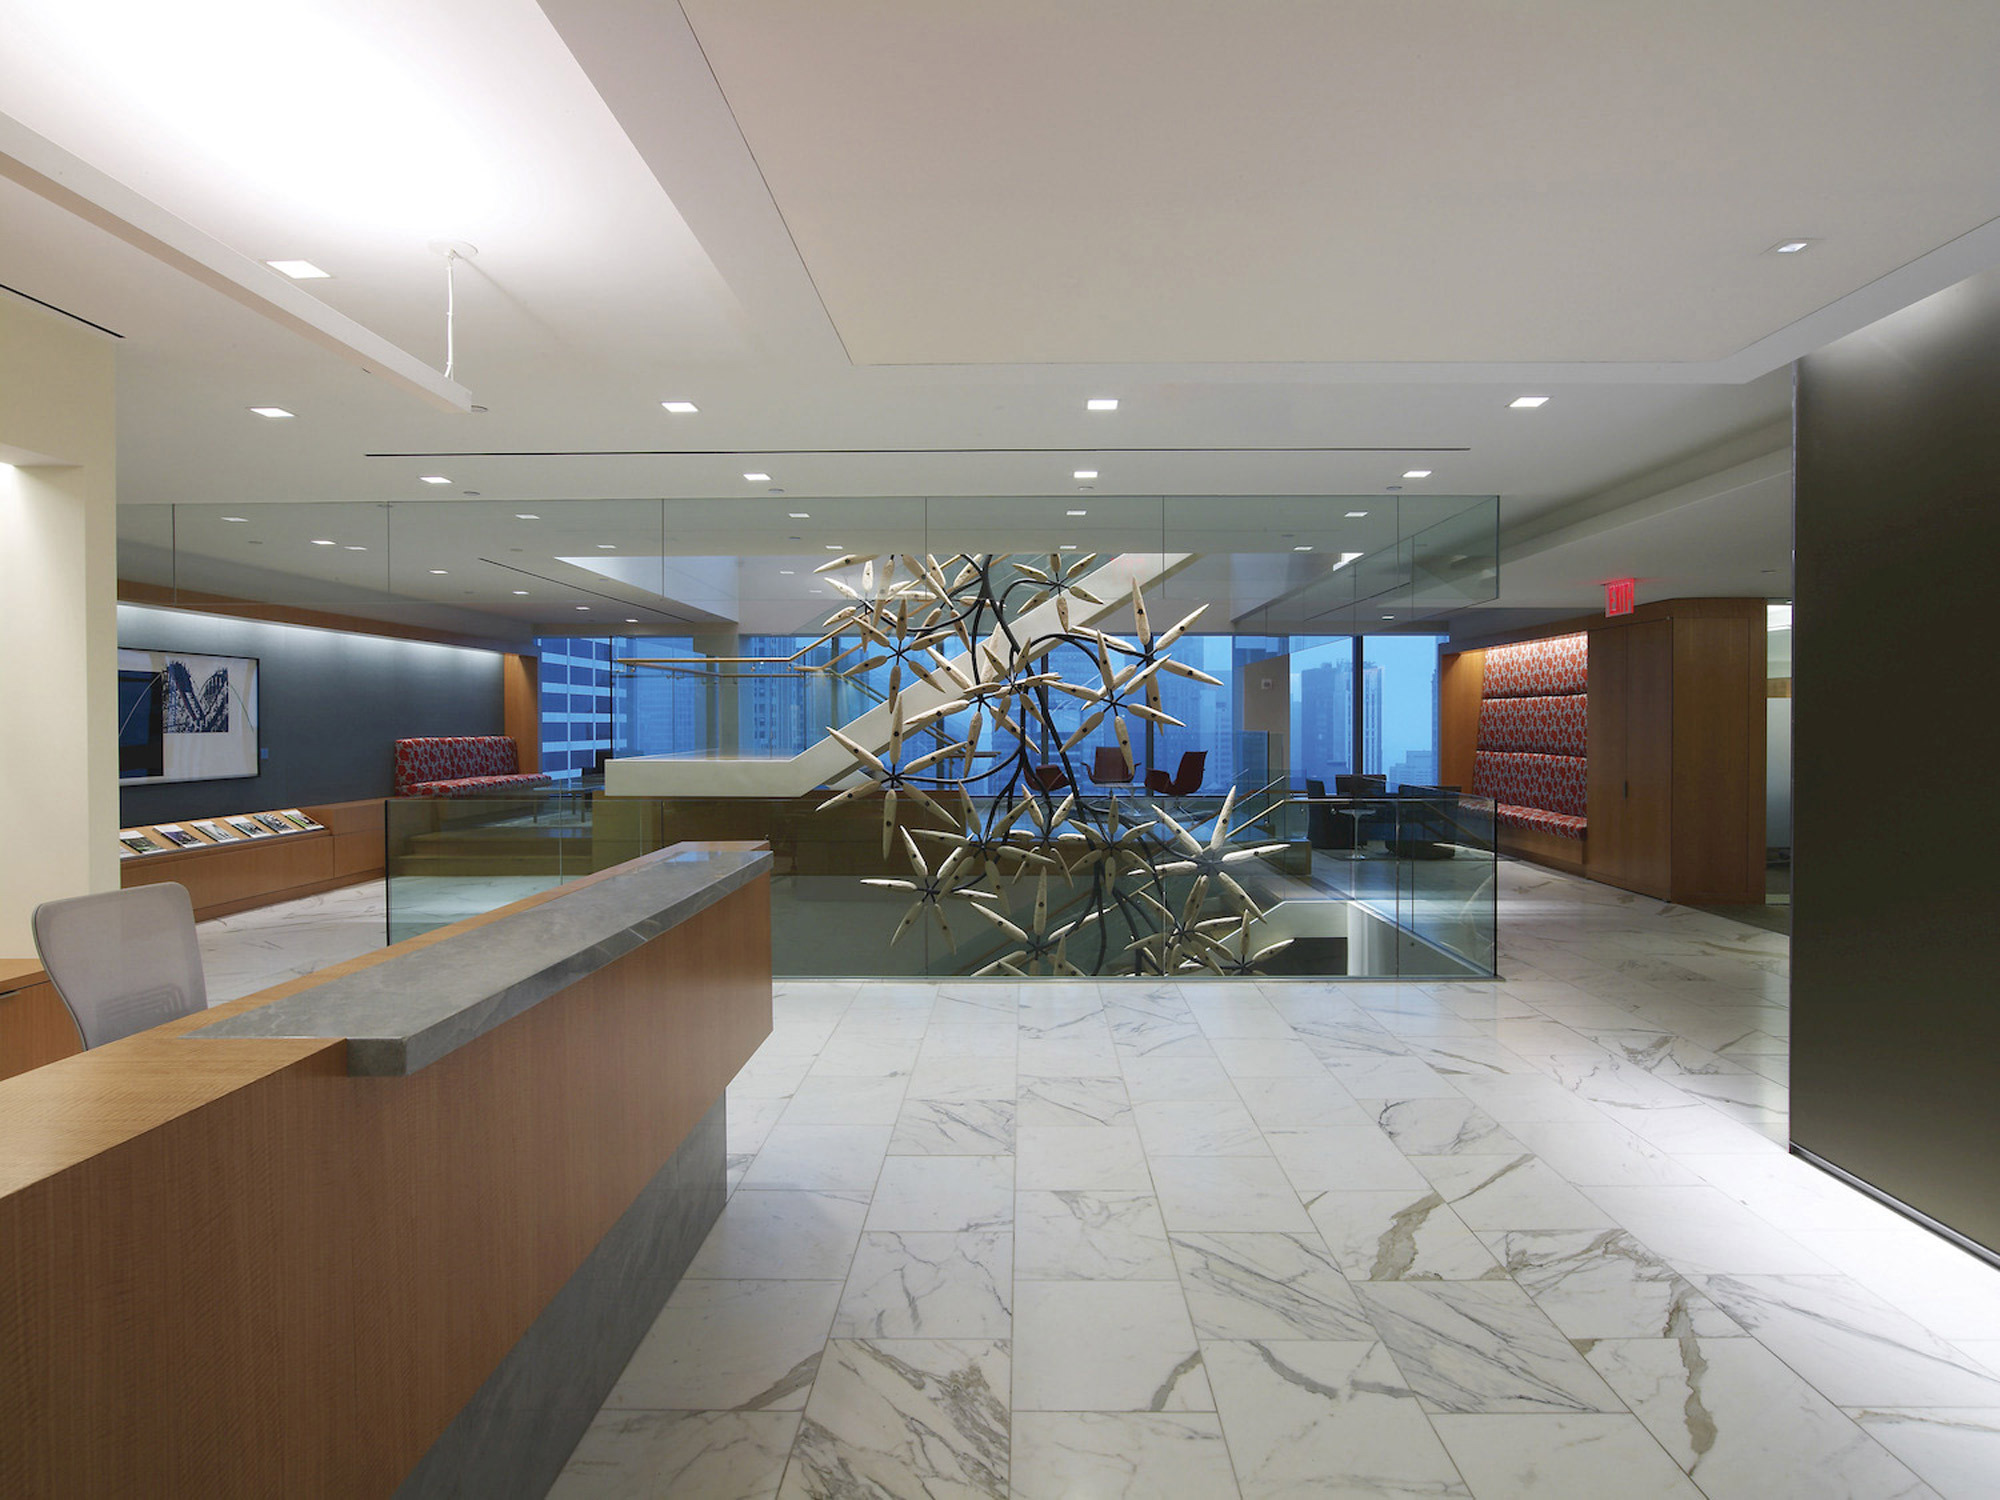 Modern corporate lobby featuring polished marble floors, a geometric central sculpture, sleek glass partitions, and a balanced natural and artificial lighting scheme. Neutral color palette accented with pops of blue on select furniture.